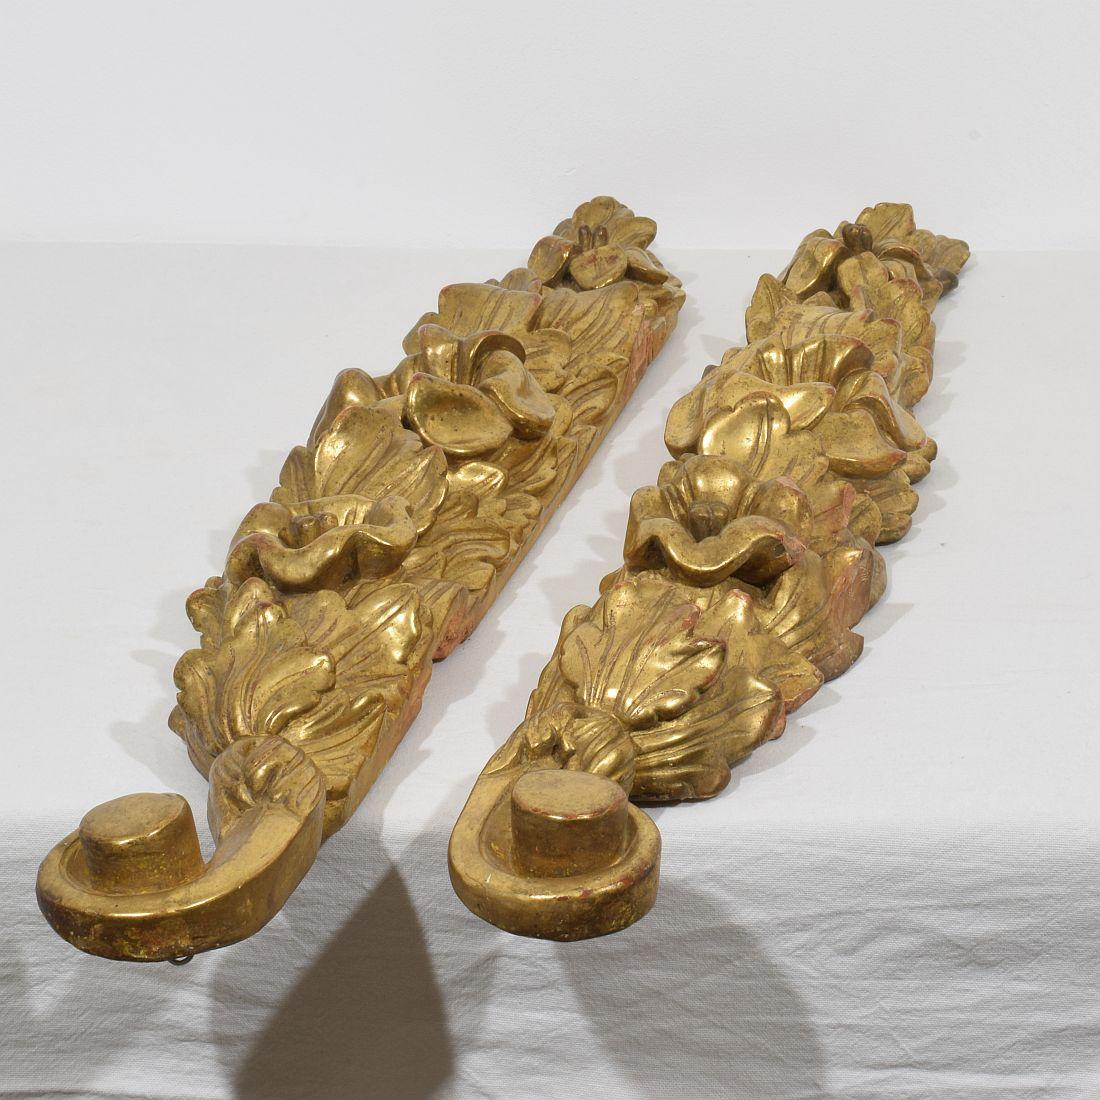 Pair of Large 18th Century Italian Giltwood Baroque Ornaments 14